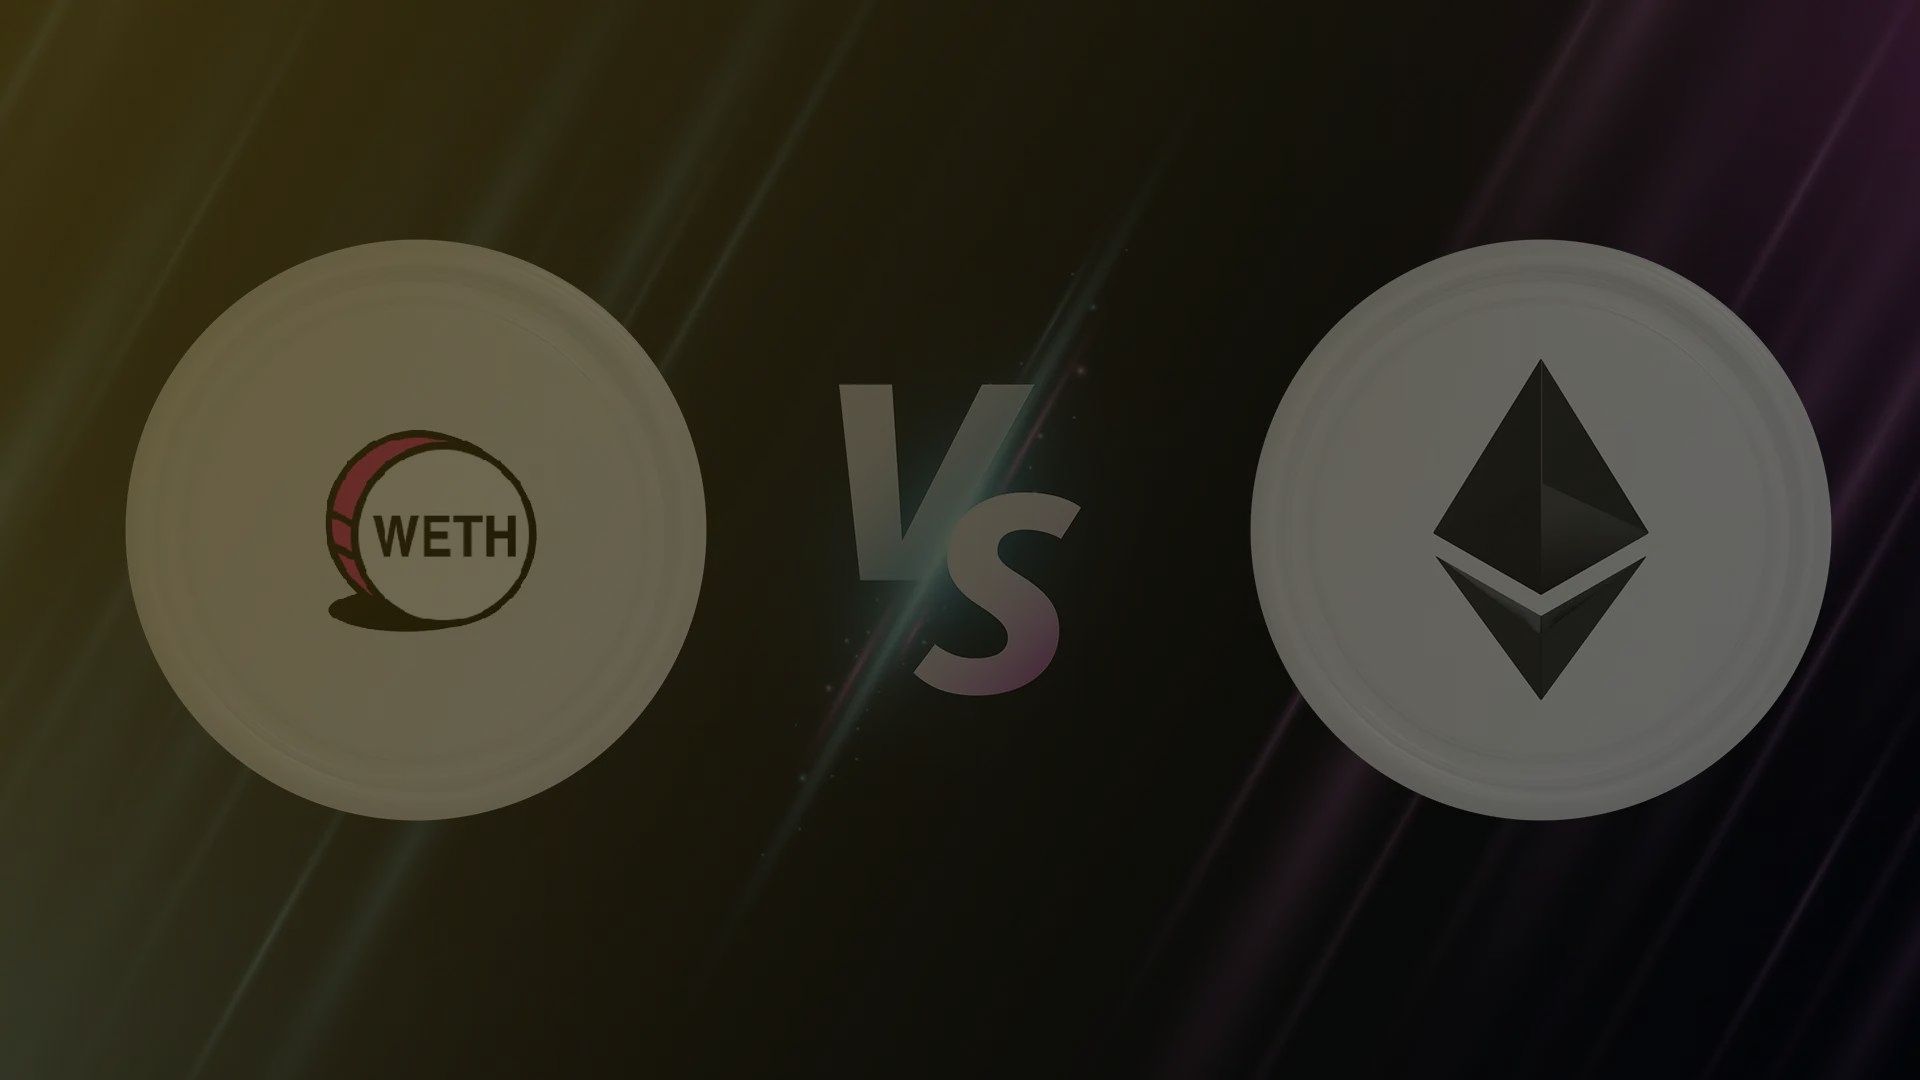 ETH VS WETH: Differences and Similarities